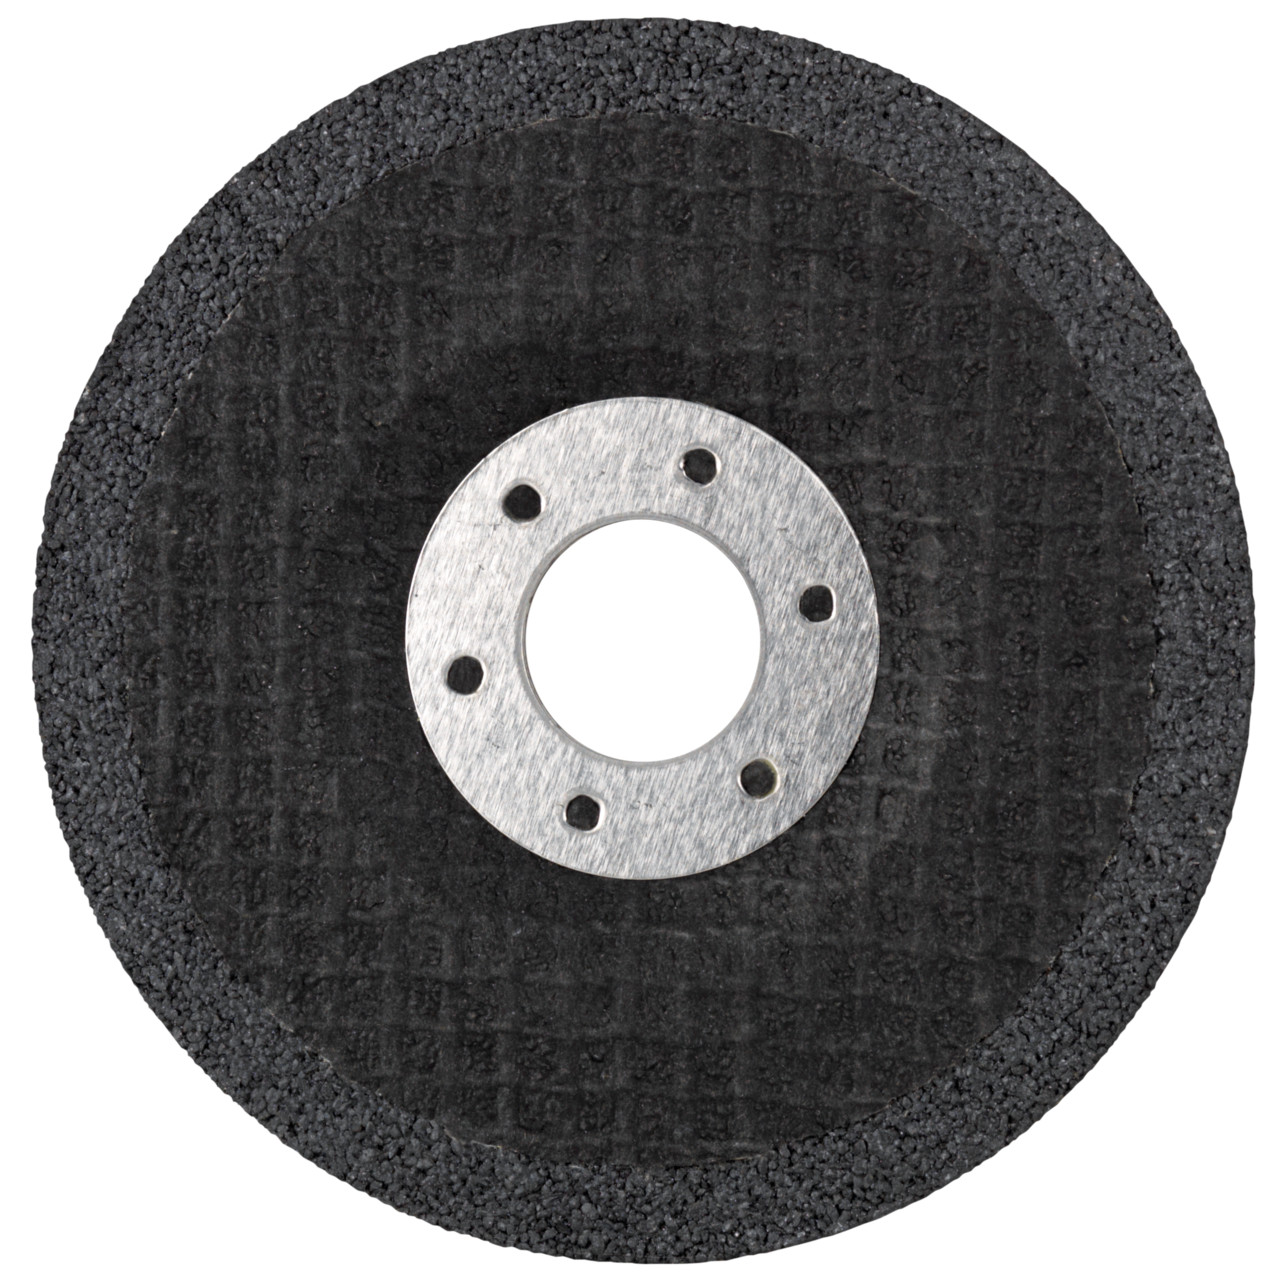 Tyrolit Cut-off wheel CUT AND GRIND DxUxH 125x2.8x22.23 2in1 for steel and stainless steel, shape: 27CC - offset version (CUT AND GRIND), Art. 757089